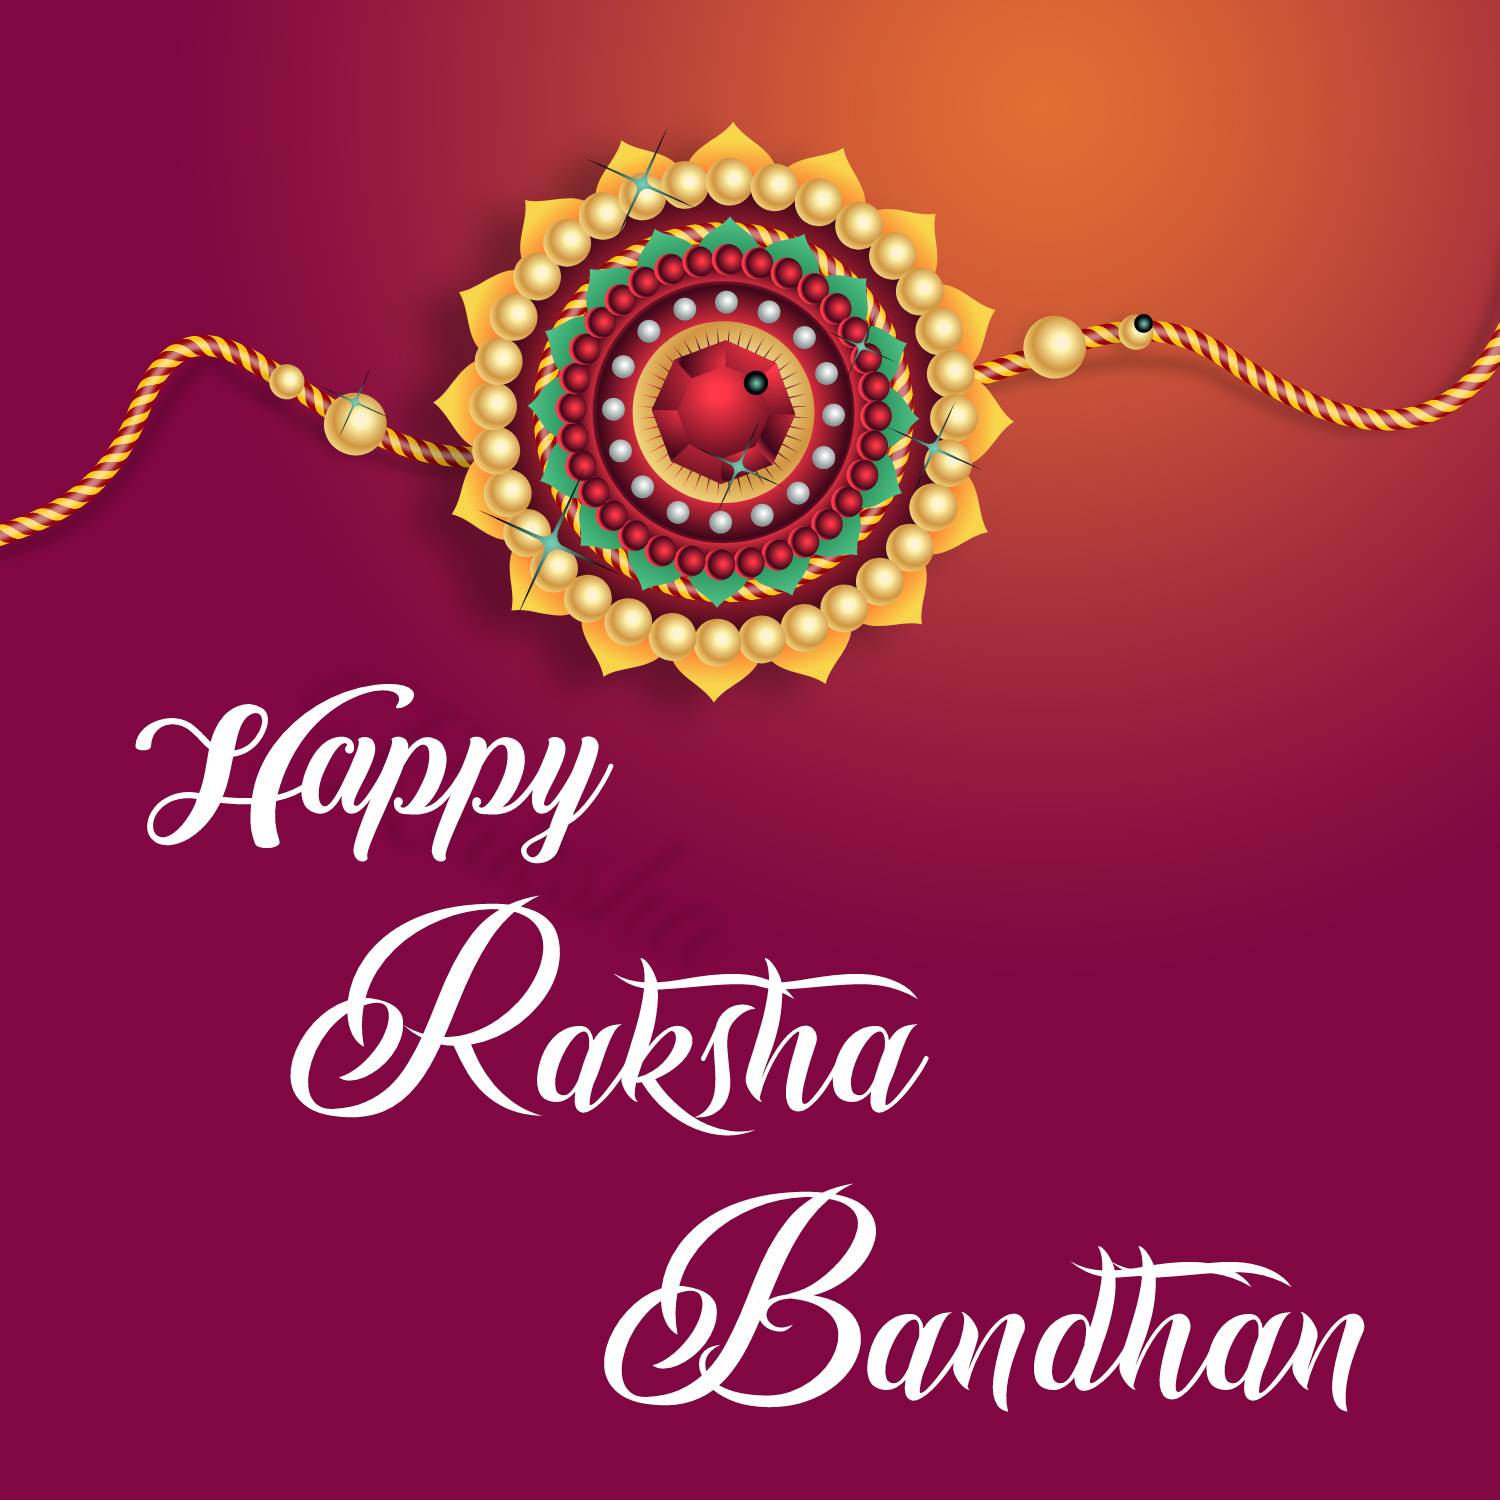 My brother may not always be at my side but he is always in my heart. Happy Raksha Bandhan - Raksha Bandhan Messages